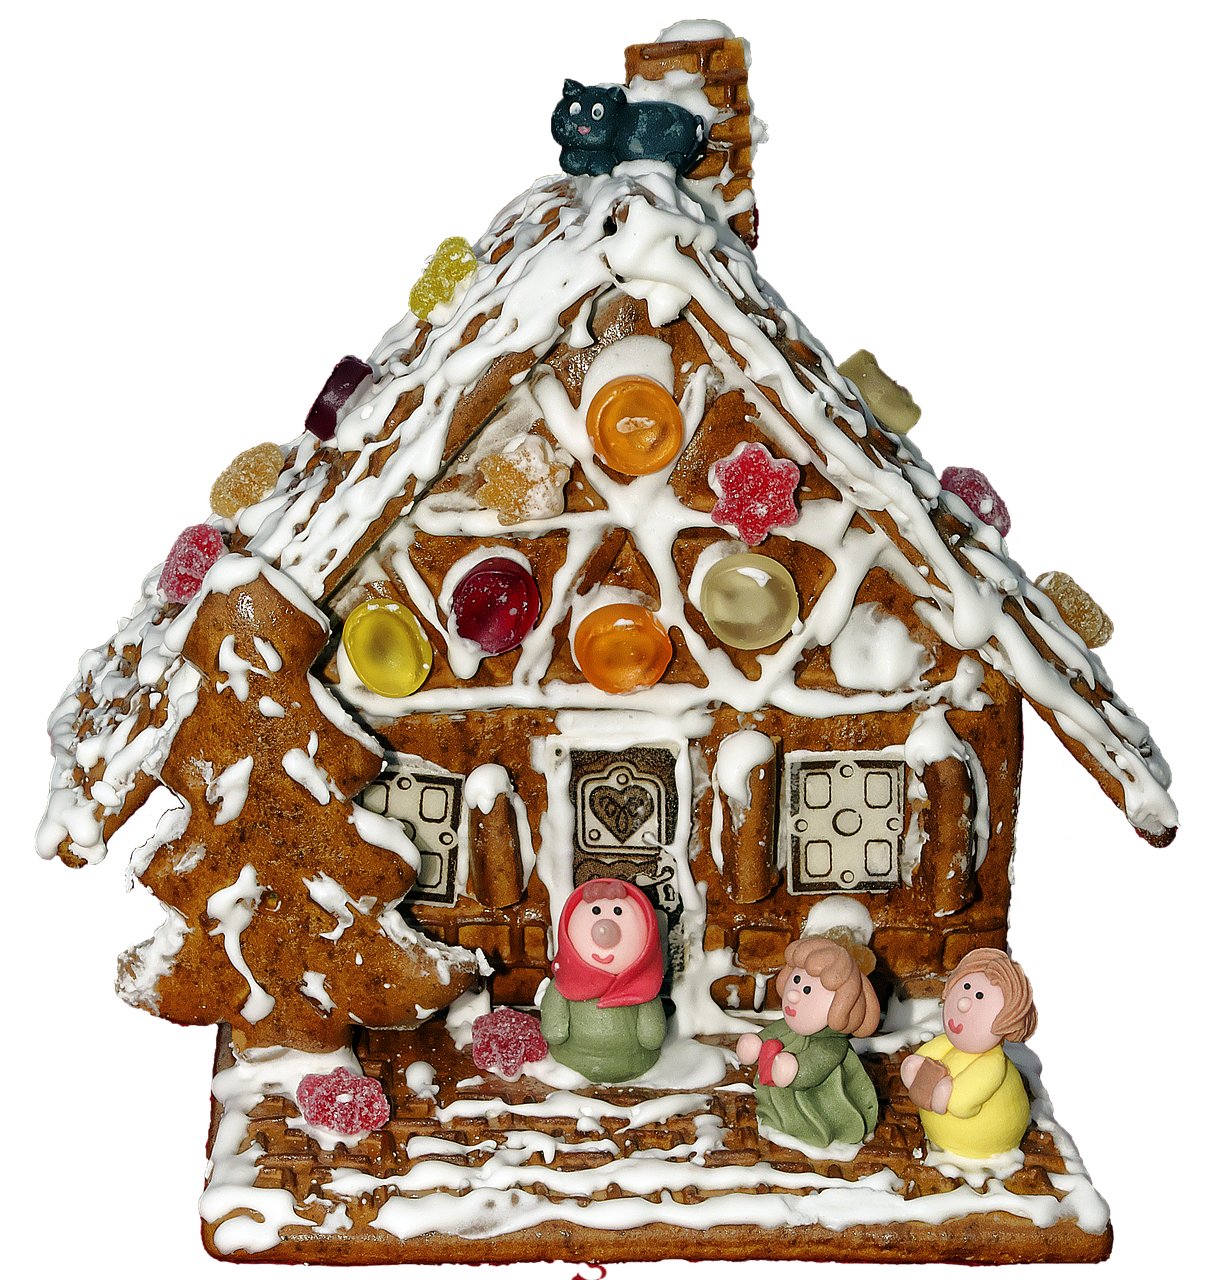 gingerbread house marzipan figures gingerbread free photo